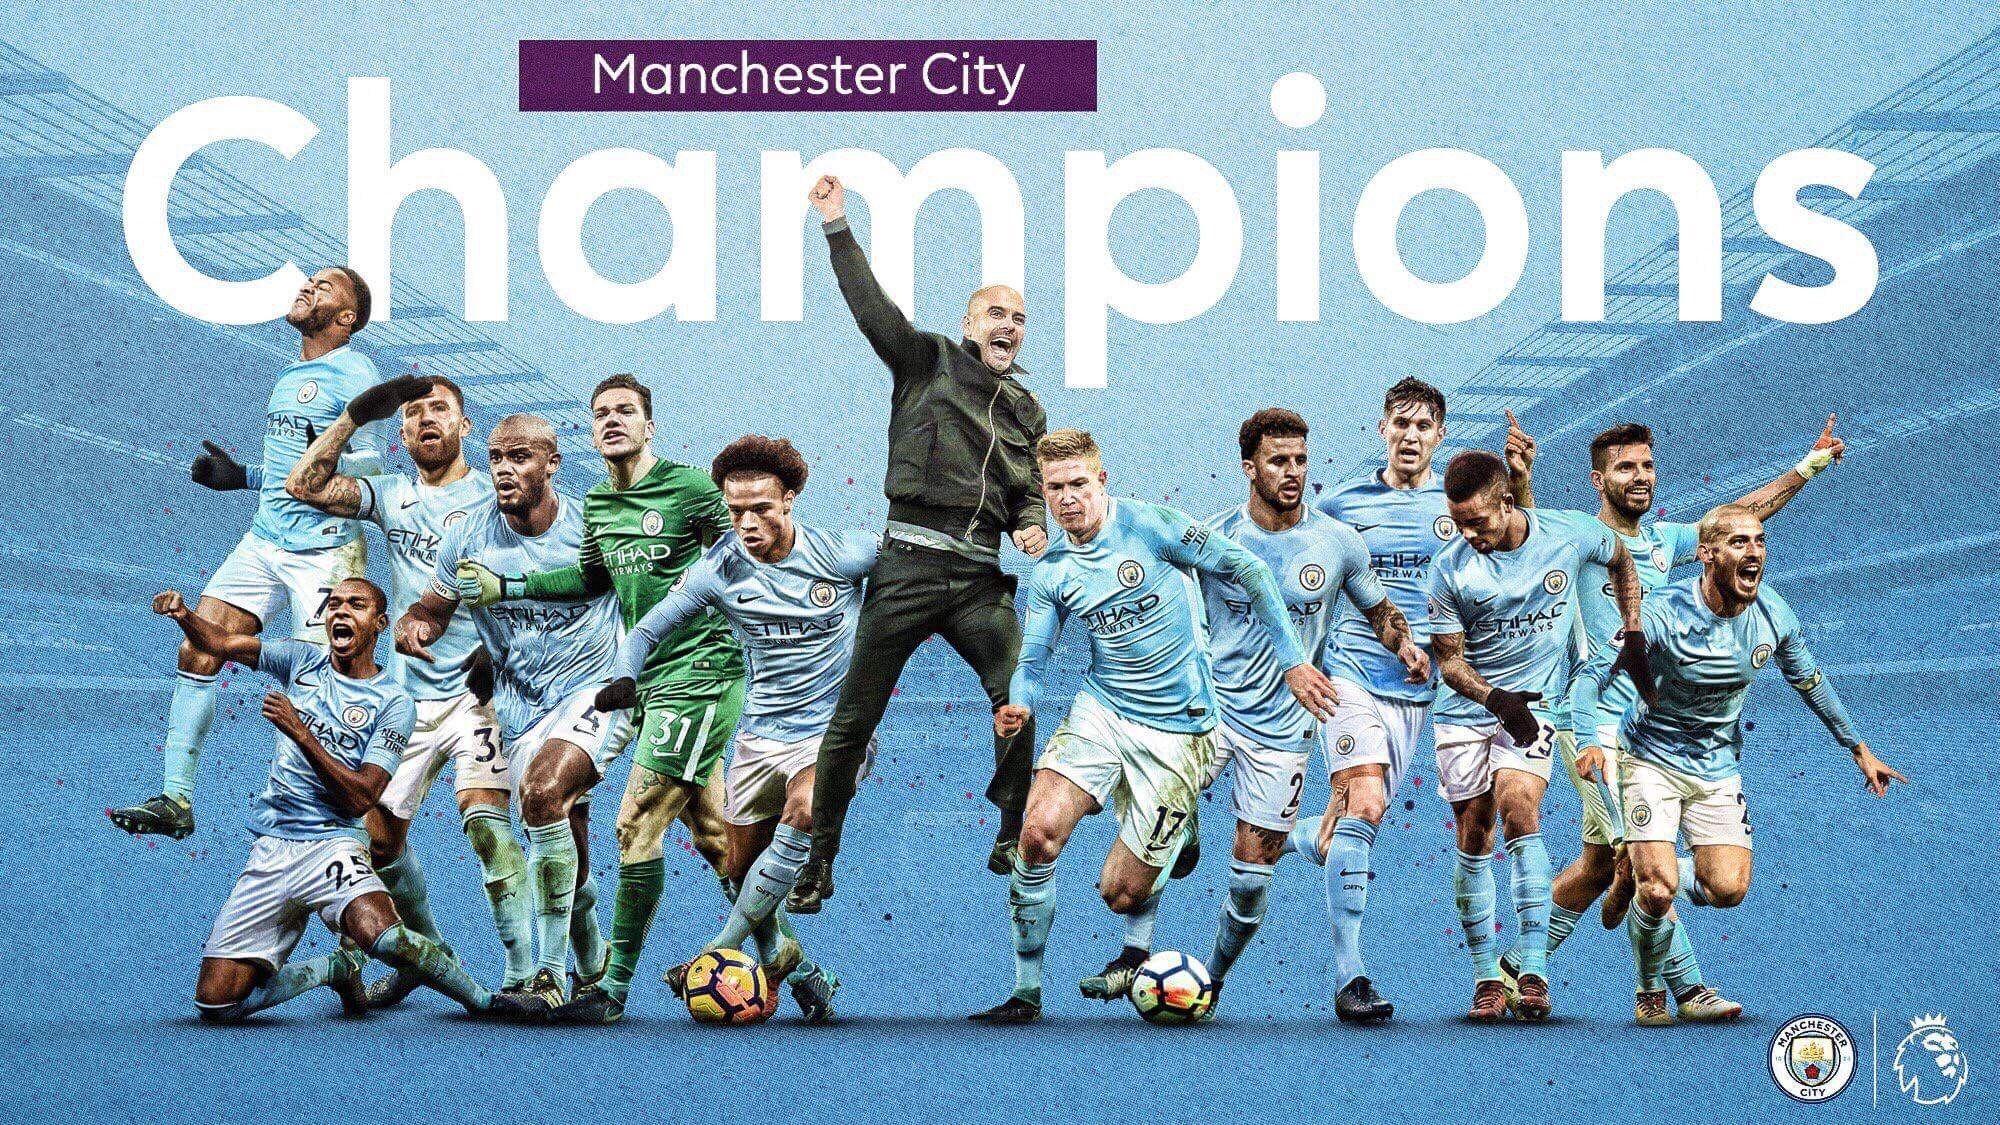 Manchester City Players Wallpapers - Wallpaper Cave